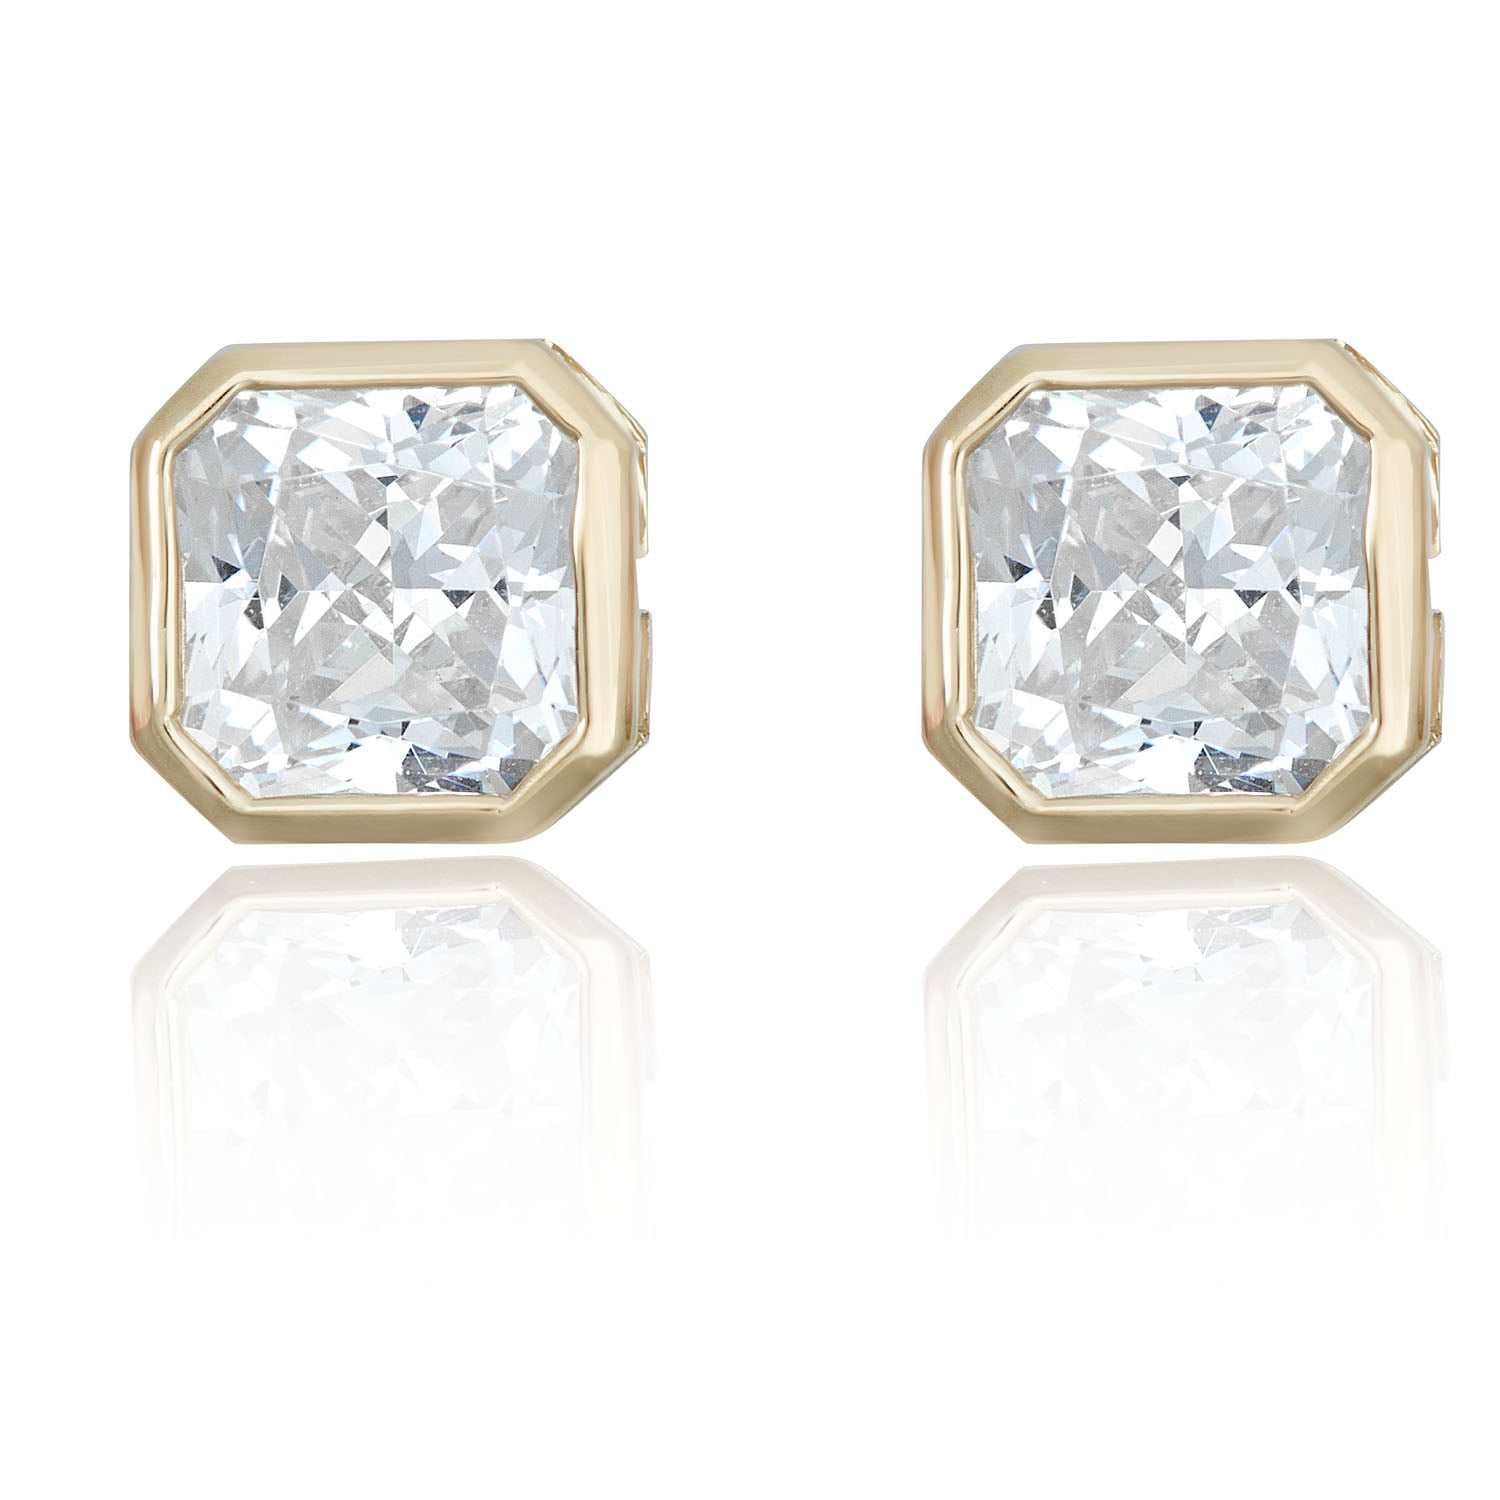 14K Yellow Gold Men's 6mm Cushion-Cut Simulated Diamond CZ Solitaire Stud Earrings